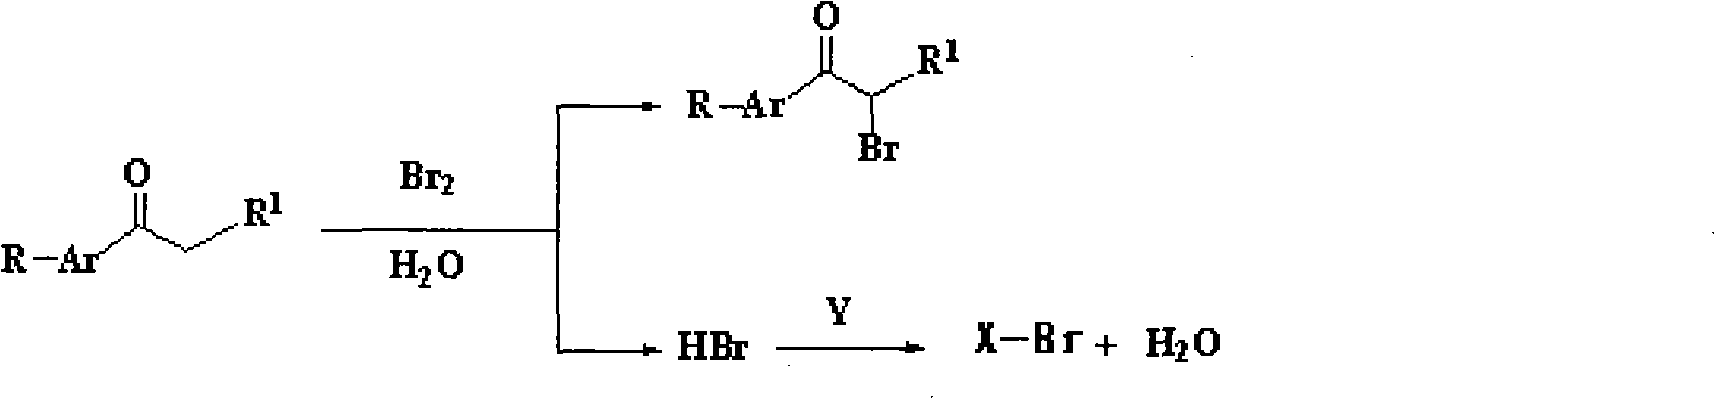 Method for synthesizing alpha-bromoketone and coproducing bromohydrocarbon